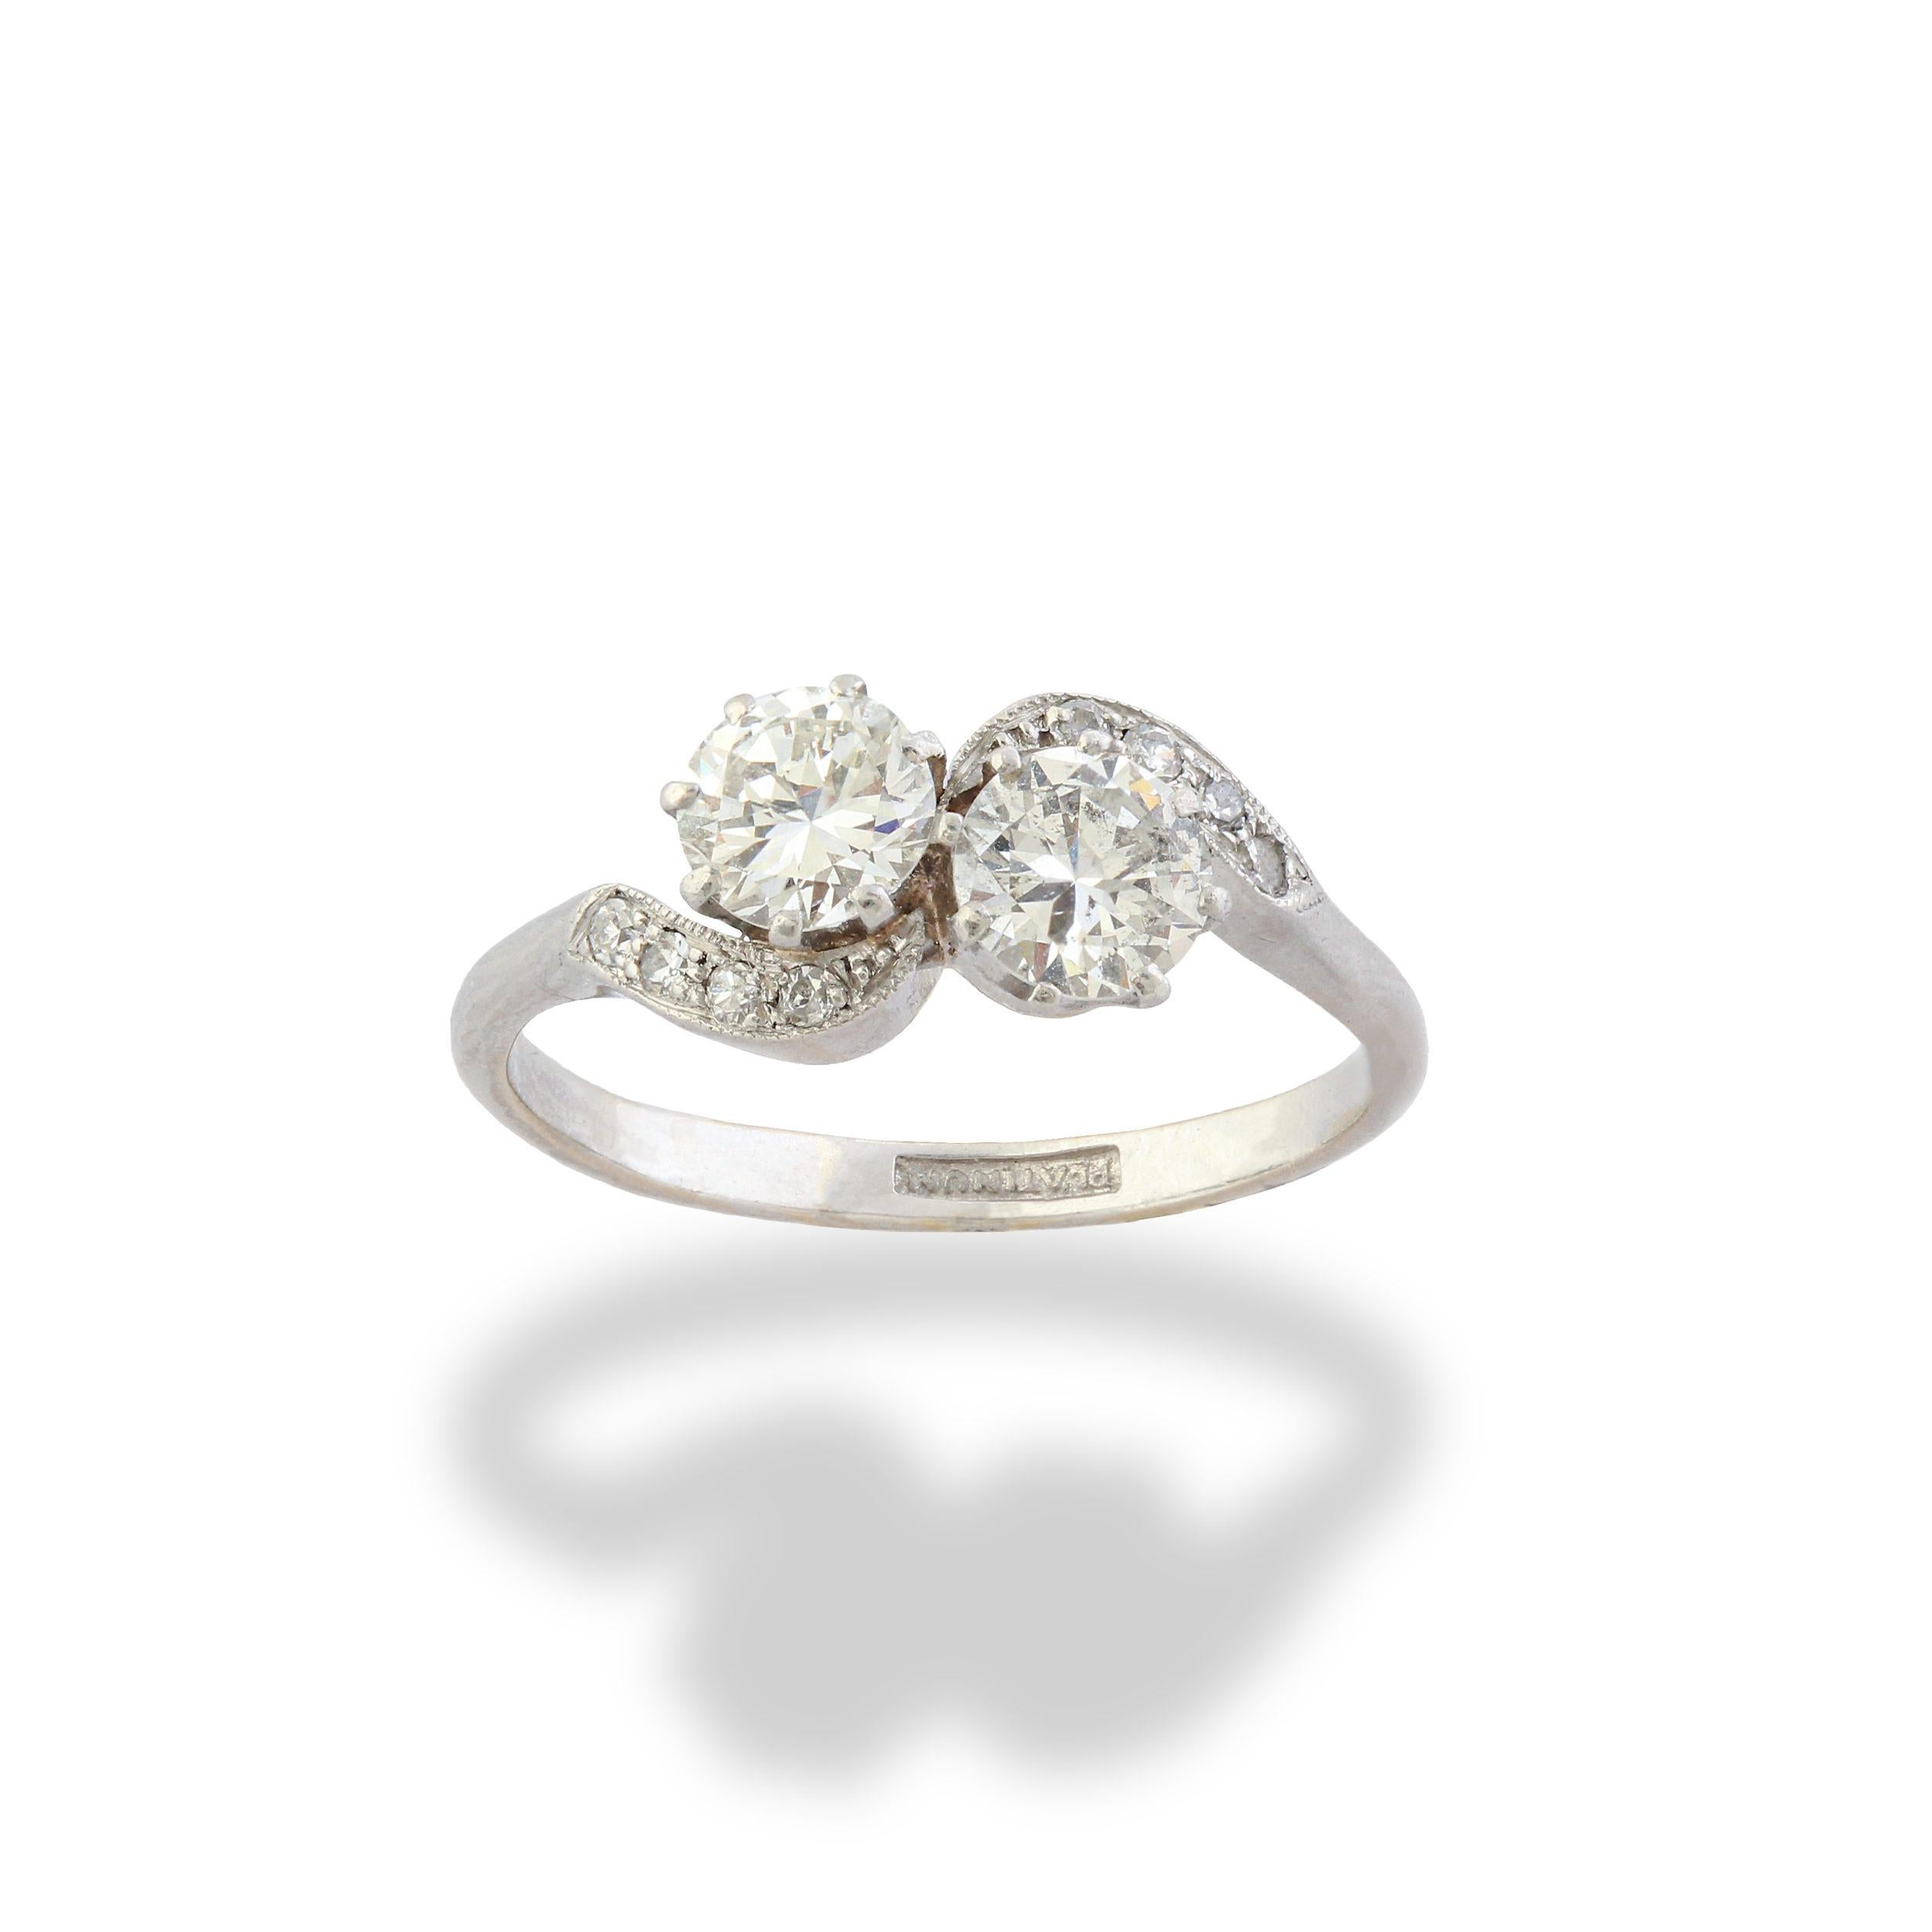 A platinum and diamond toi et moi ring. Toi et moi is French for you and me and the style symbolises the coming together of two people in love by two gemstones resting beside one another. The ring is claw-set with two circle-cut diamonds with